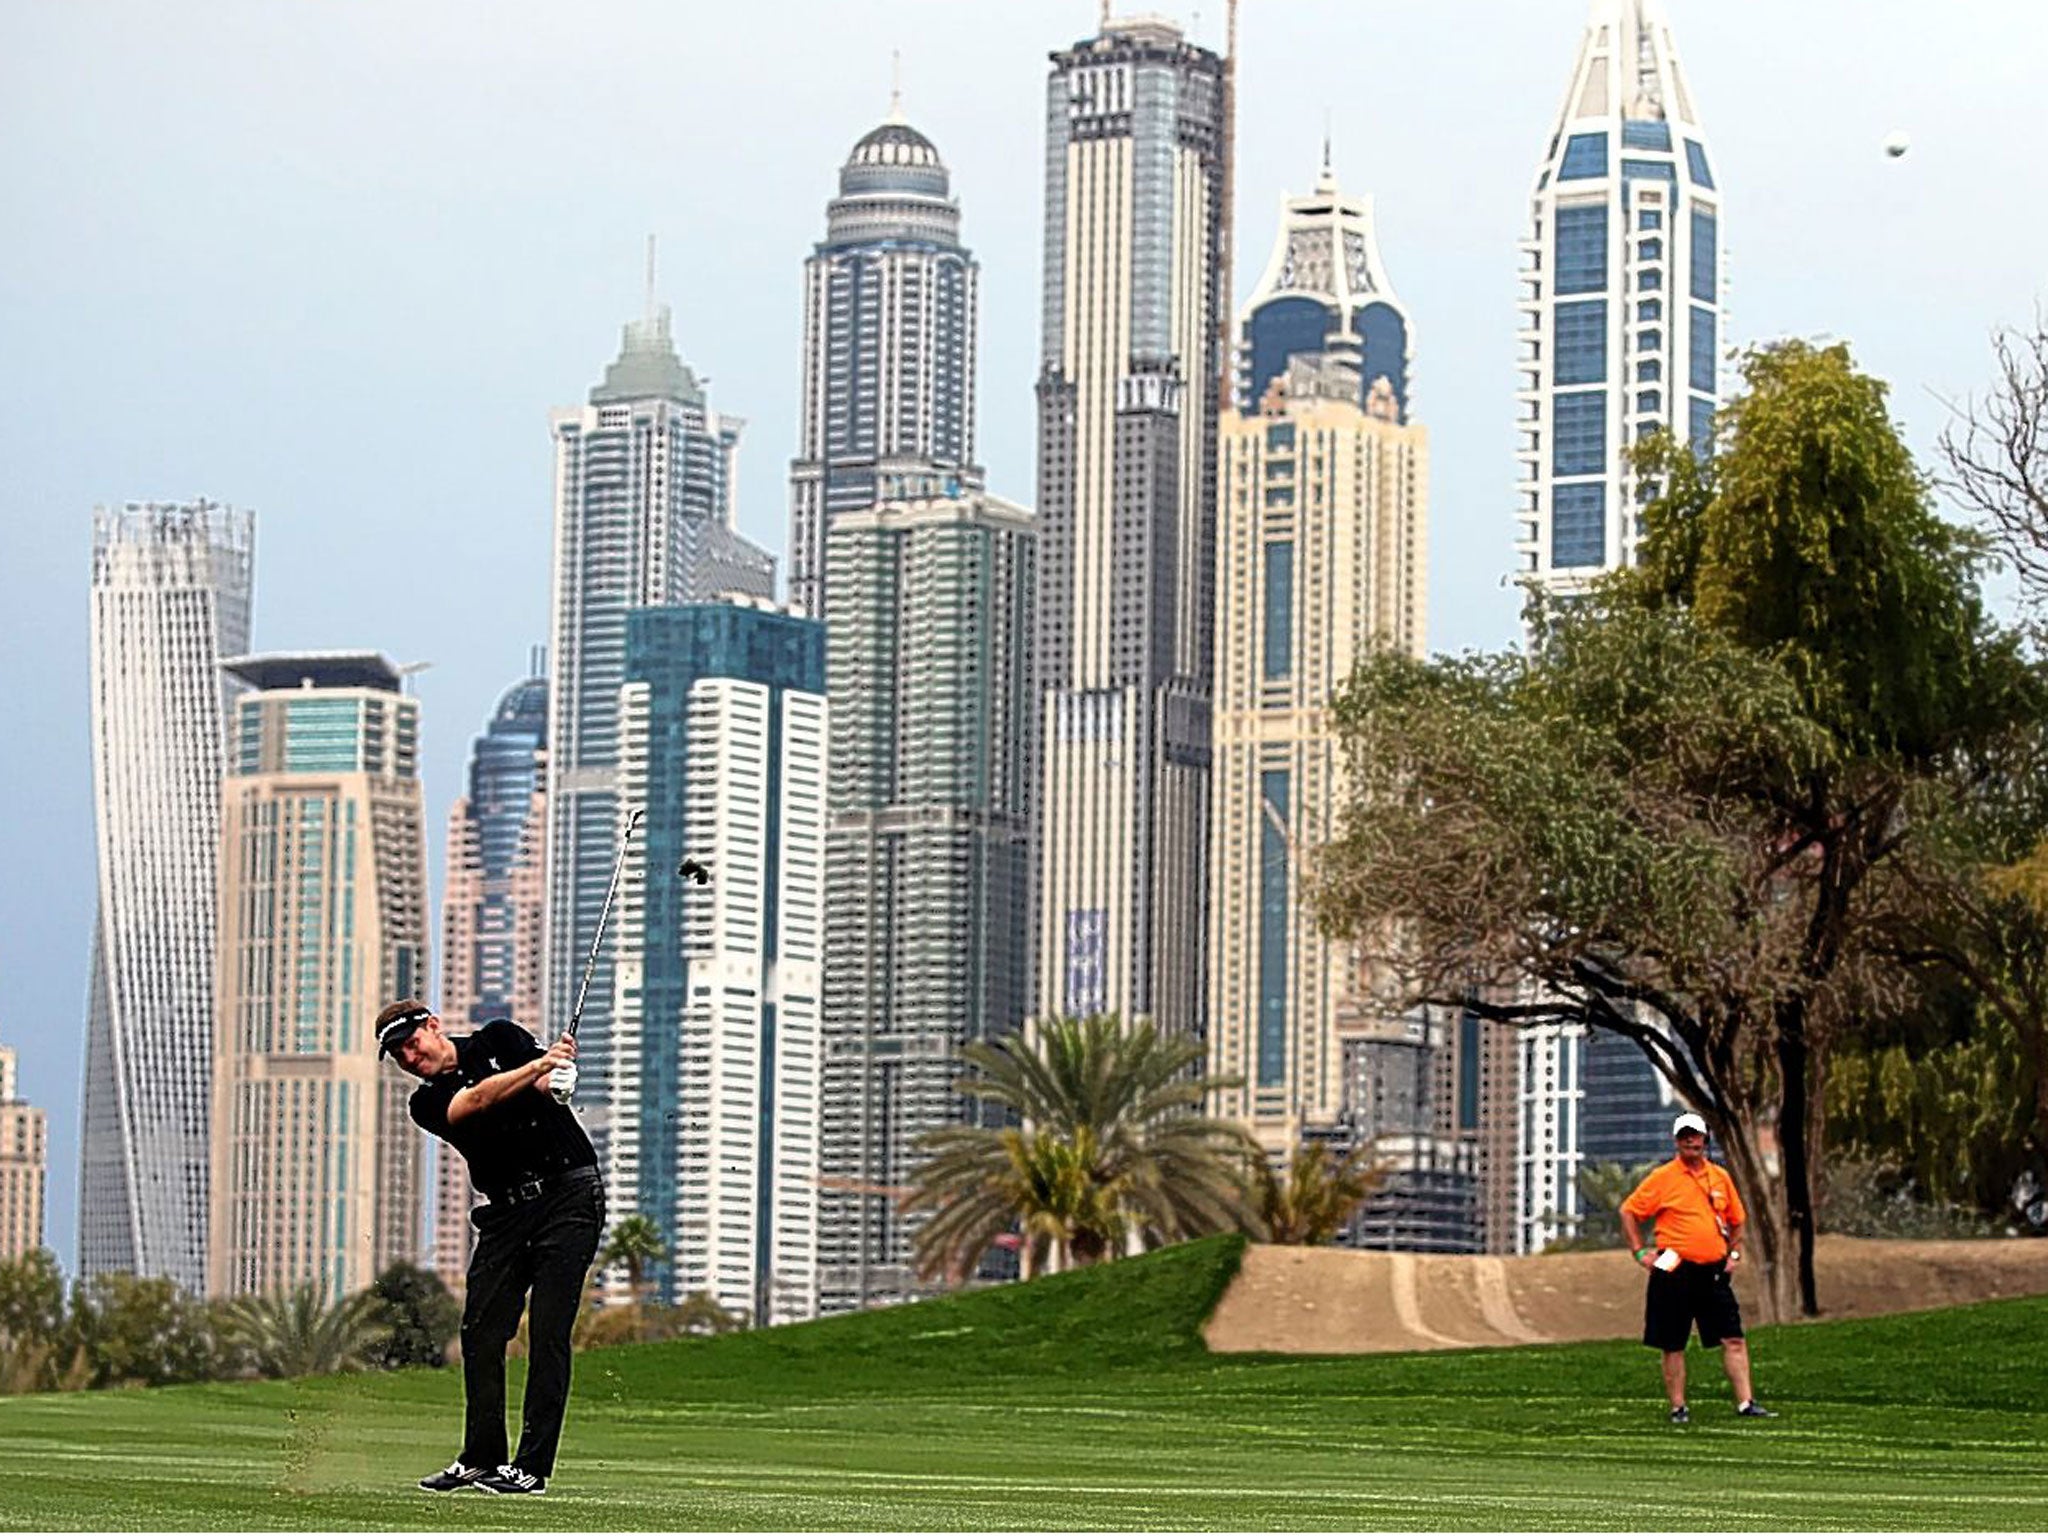 Stephen Gallacher became the first person to retain the trophy with victory in Dubai on Sunday